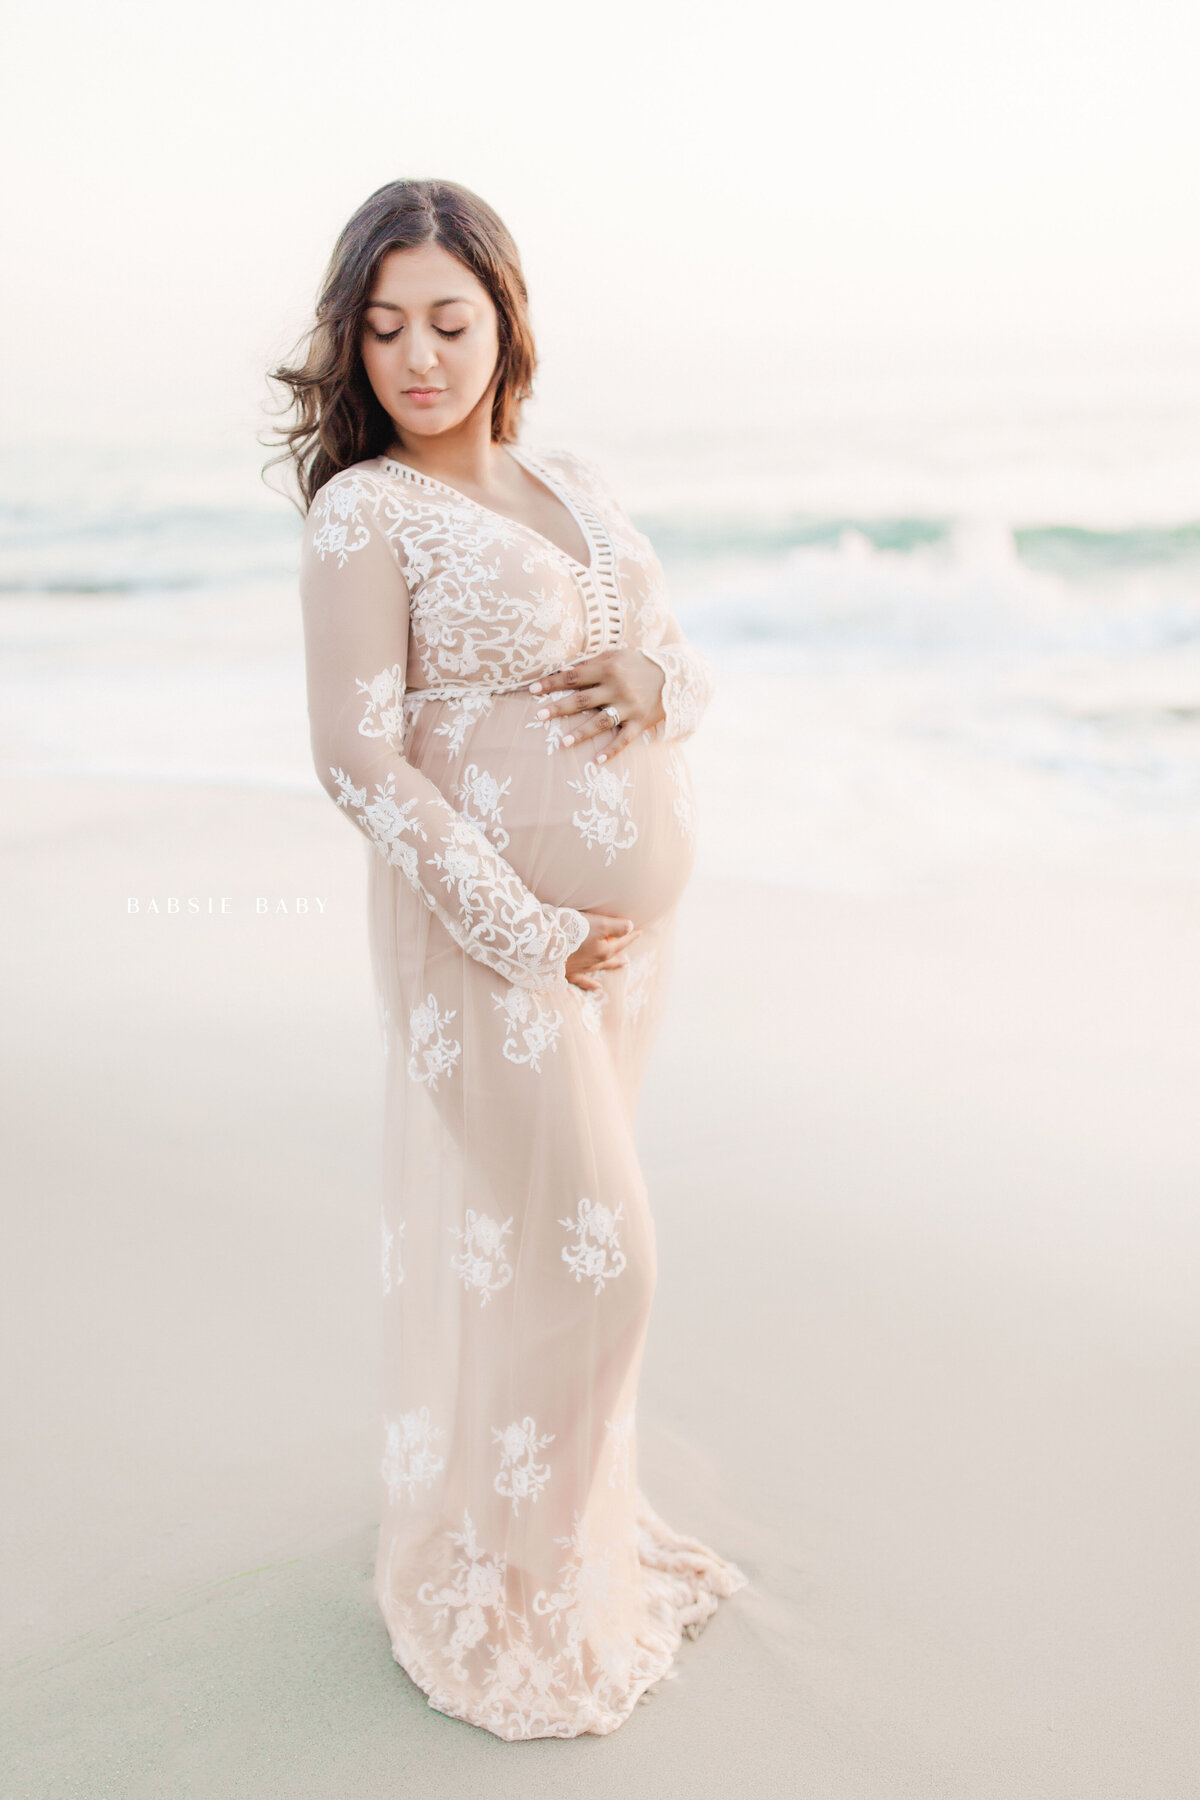 Babsie-Ly-Photography-Maternity-Betsy-021A